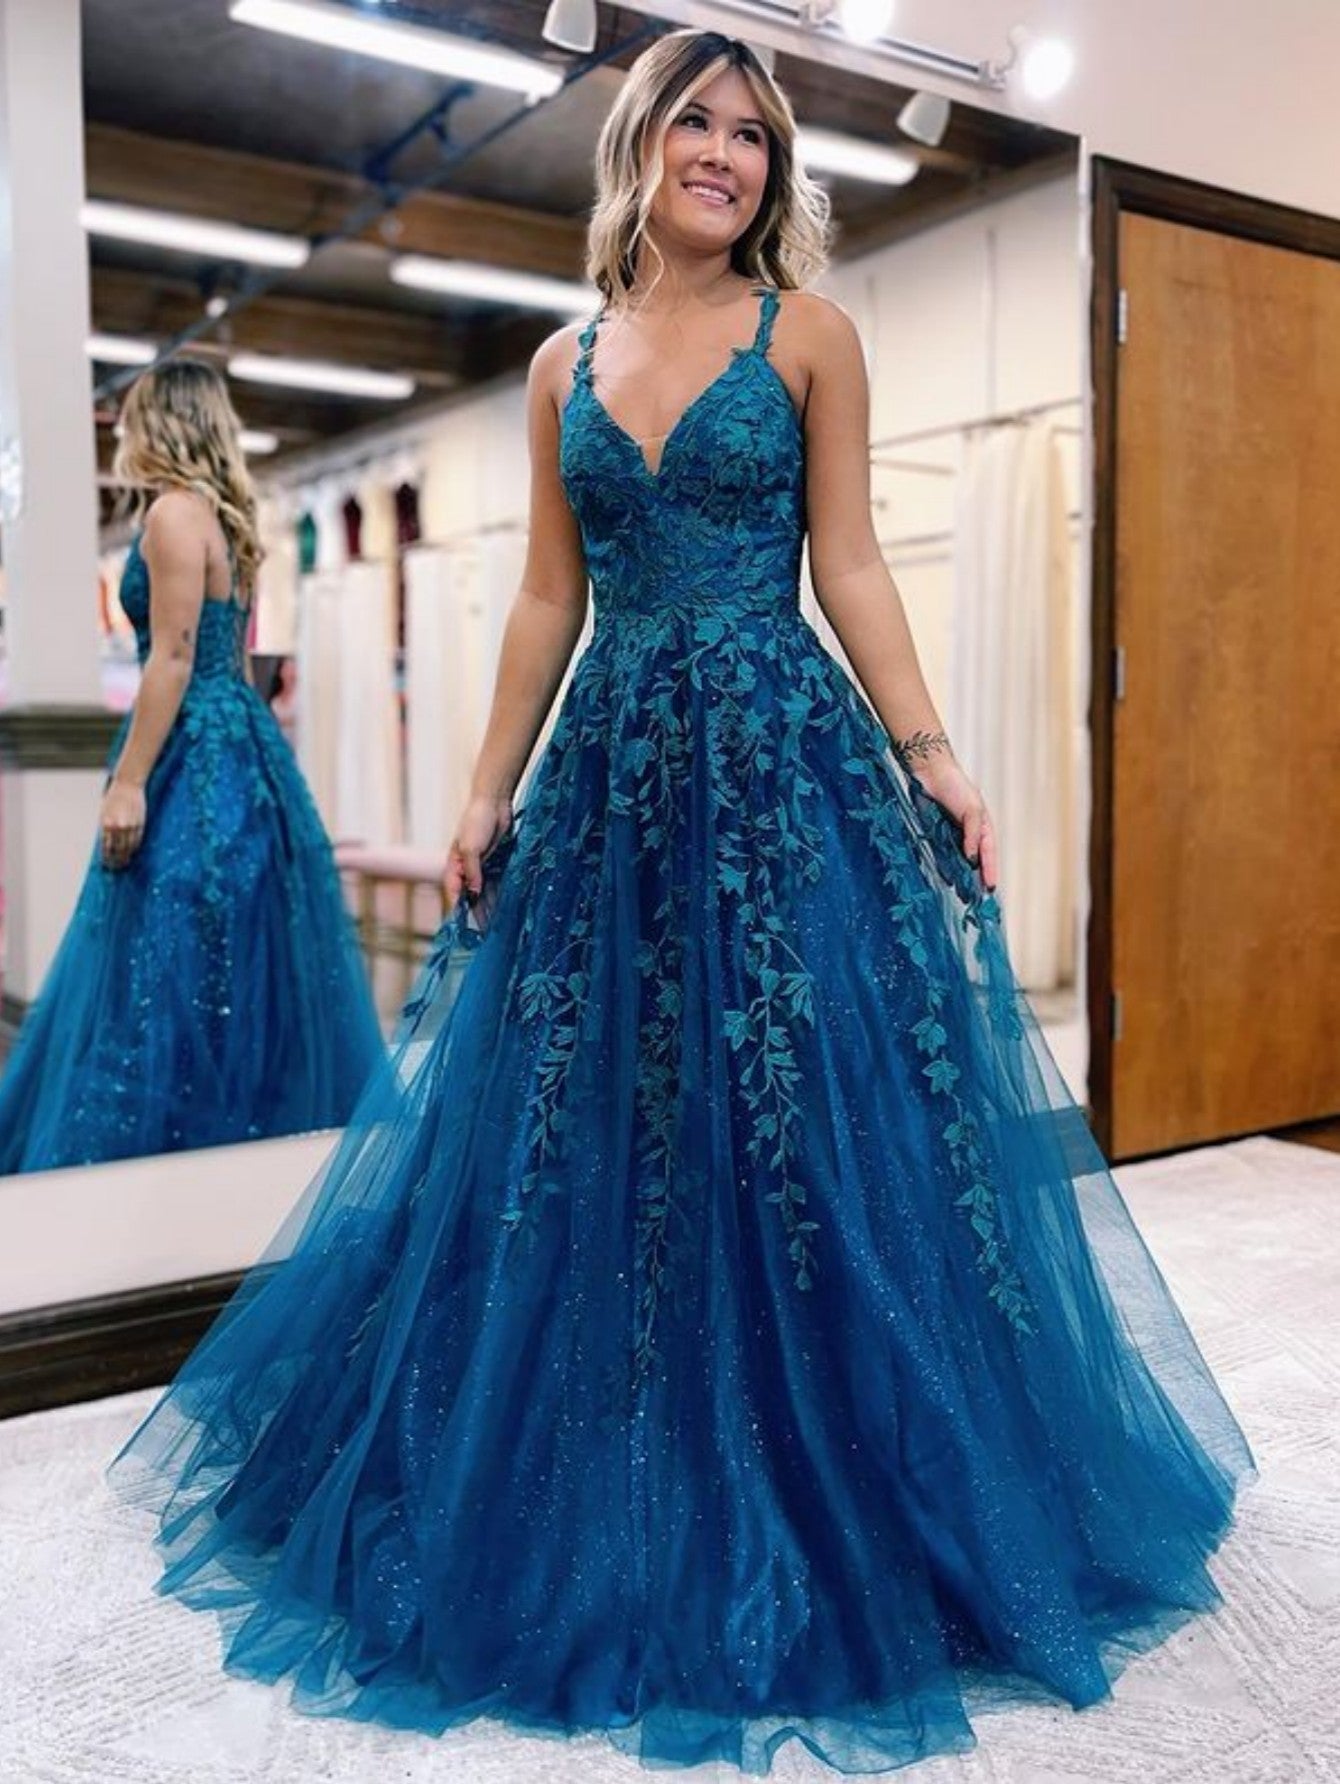 Accessorizing Your Blue Lace Prom Dress